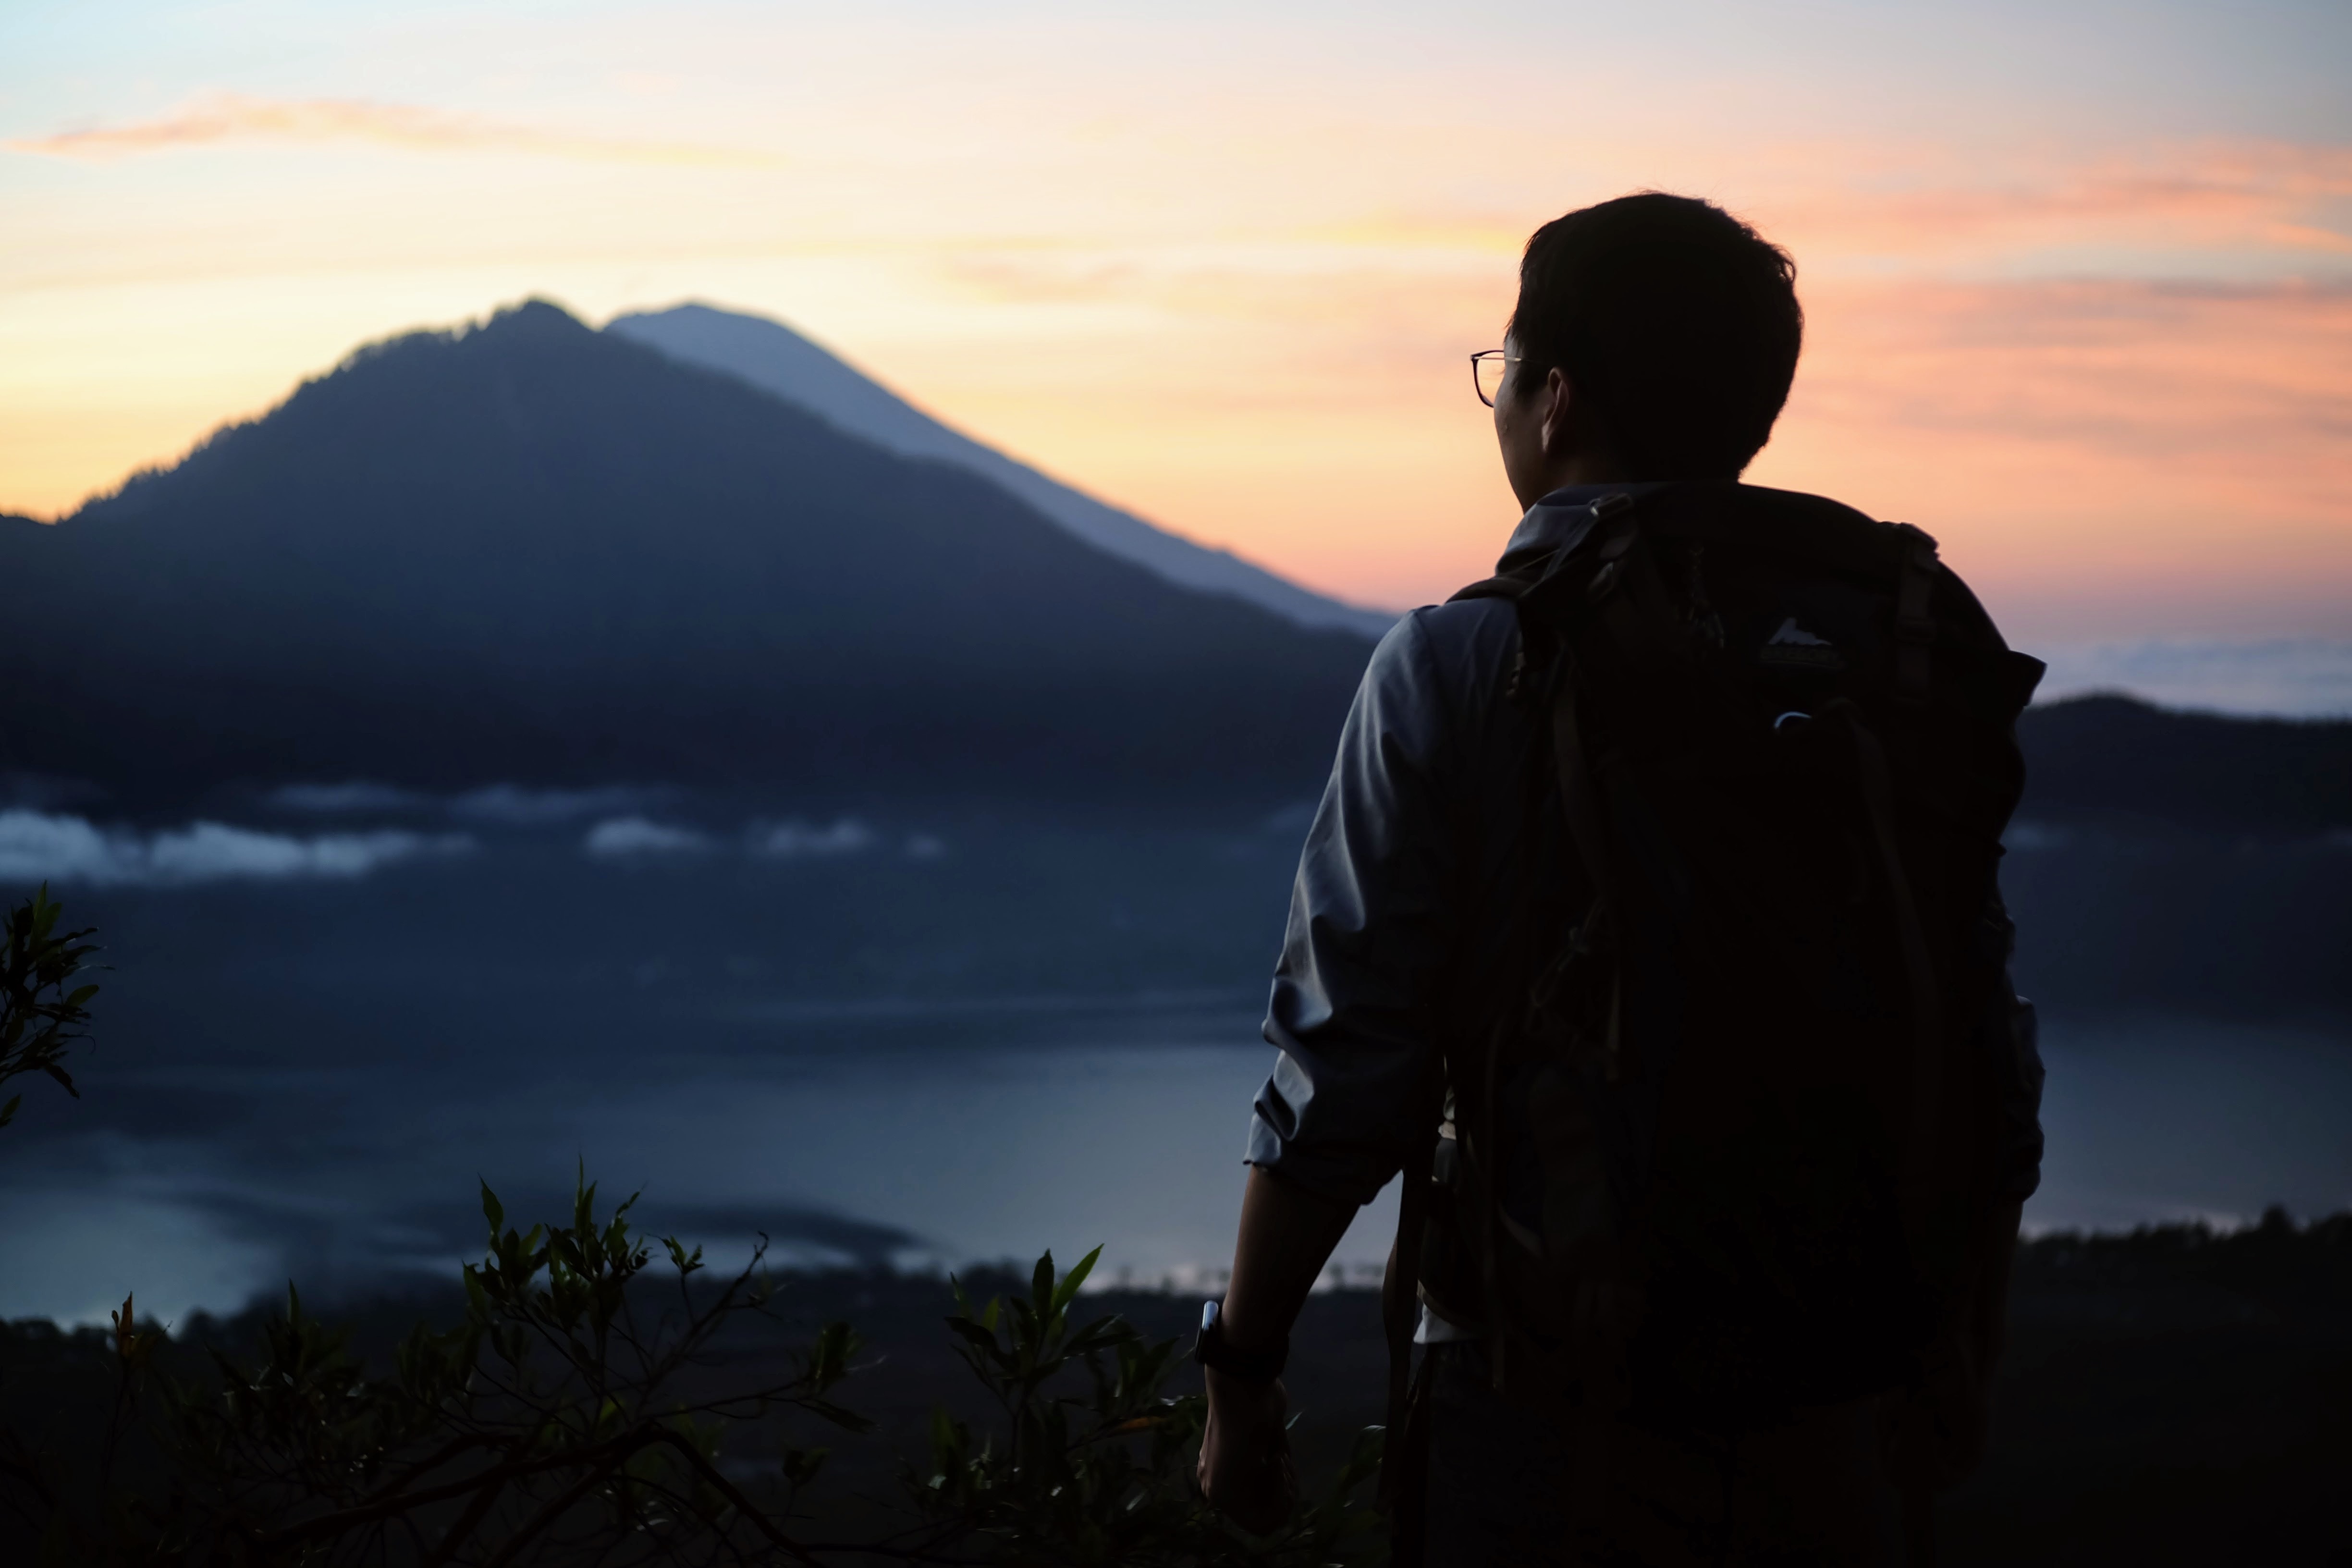 A hiker looks out over Mount Agung. Photo: Wang Dongxu/Unsplash